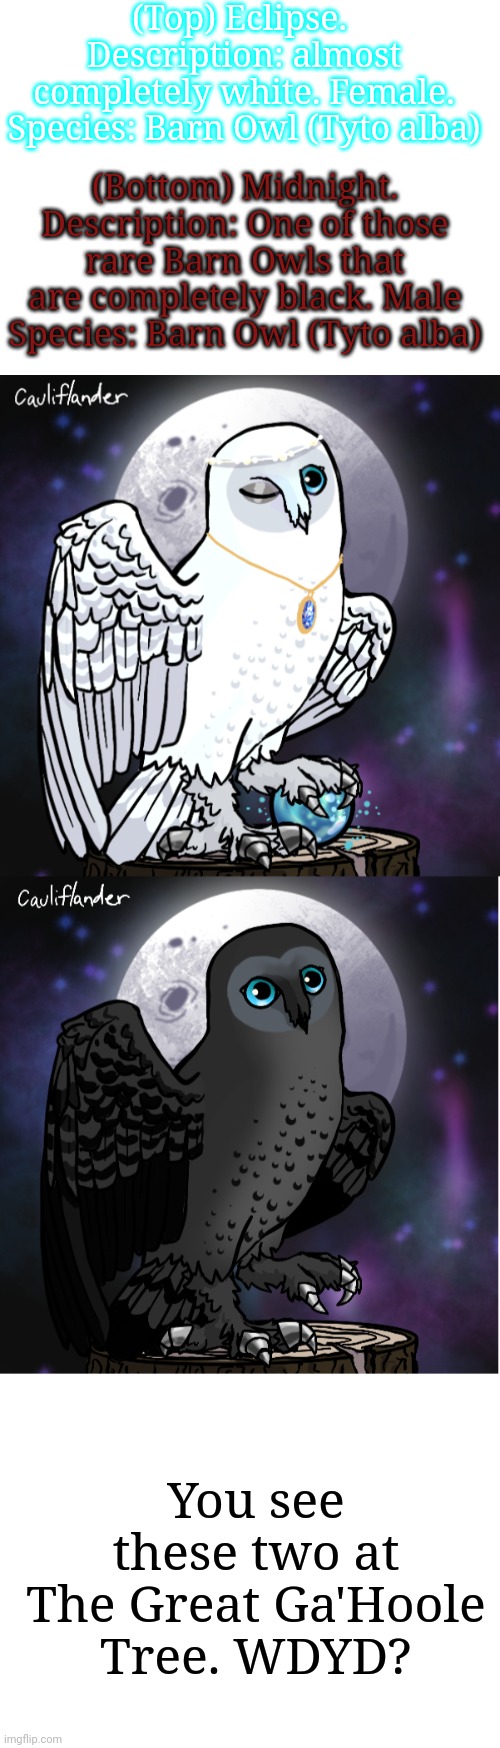 This is a Guardians of Ga'Hoole roleplay or owl roleplay. No killing them, no Joke or OP characters | (Top) Eclipse. 
Description: almost completely white. Female.
Species: Barn Owl (Tyto alba); (Bottom) Midnight.
Description: One of those rare Barn Owls that are completely black. Male
Species: Barn Owl (Tyto alba); You see these two at The Great Ga'Hoole Tree. WDYD? | image tagged in blank white template | made w/ Imgflip meme maker